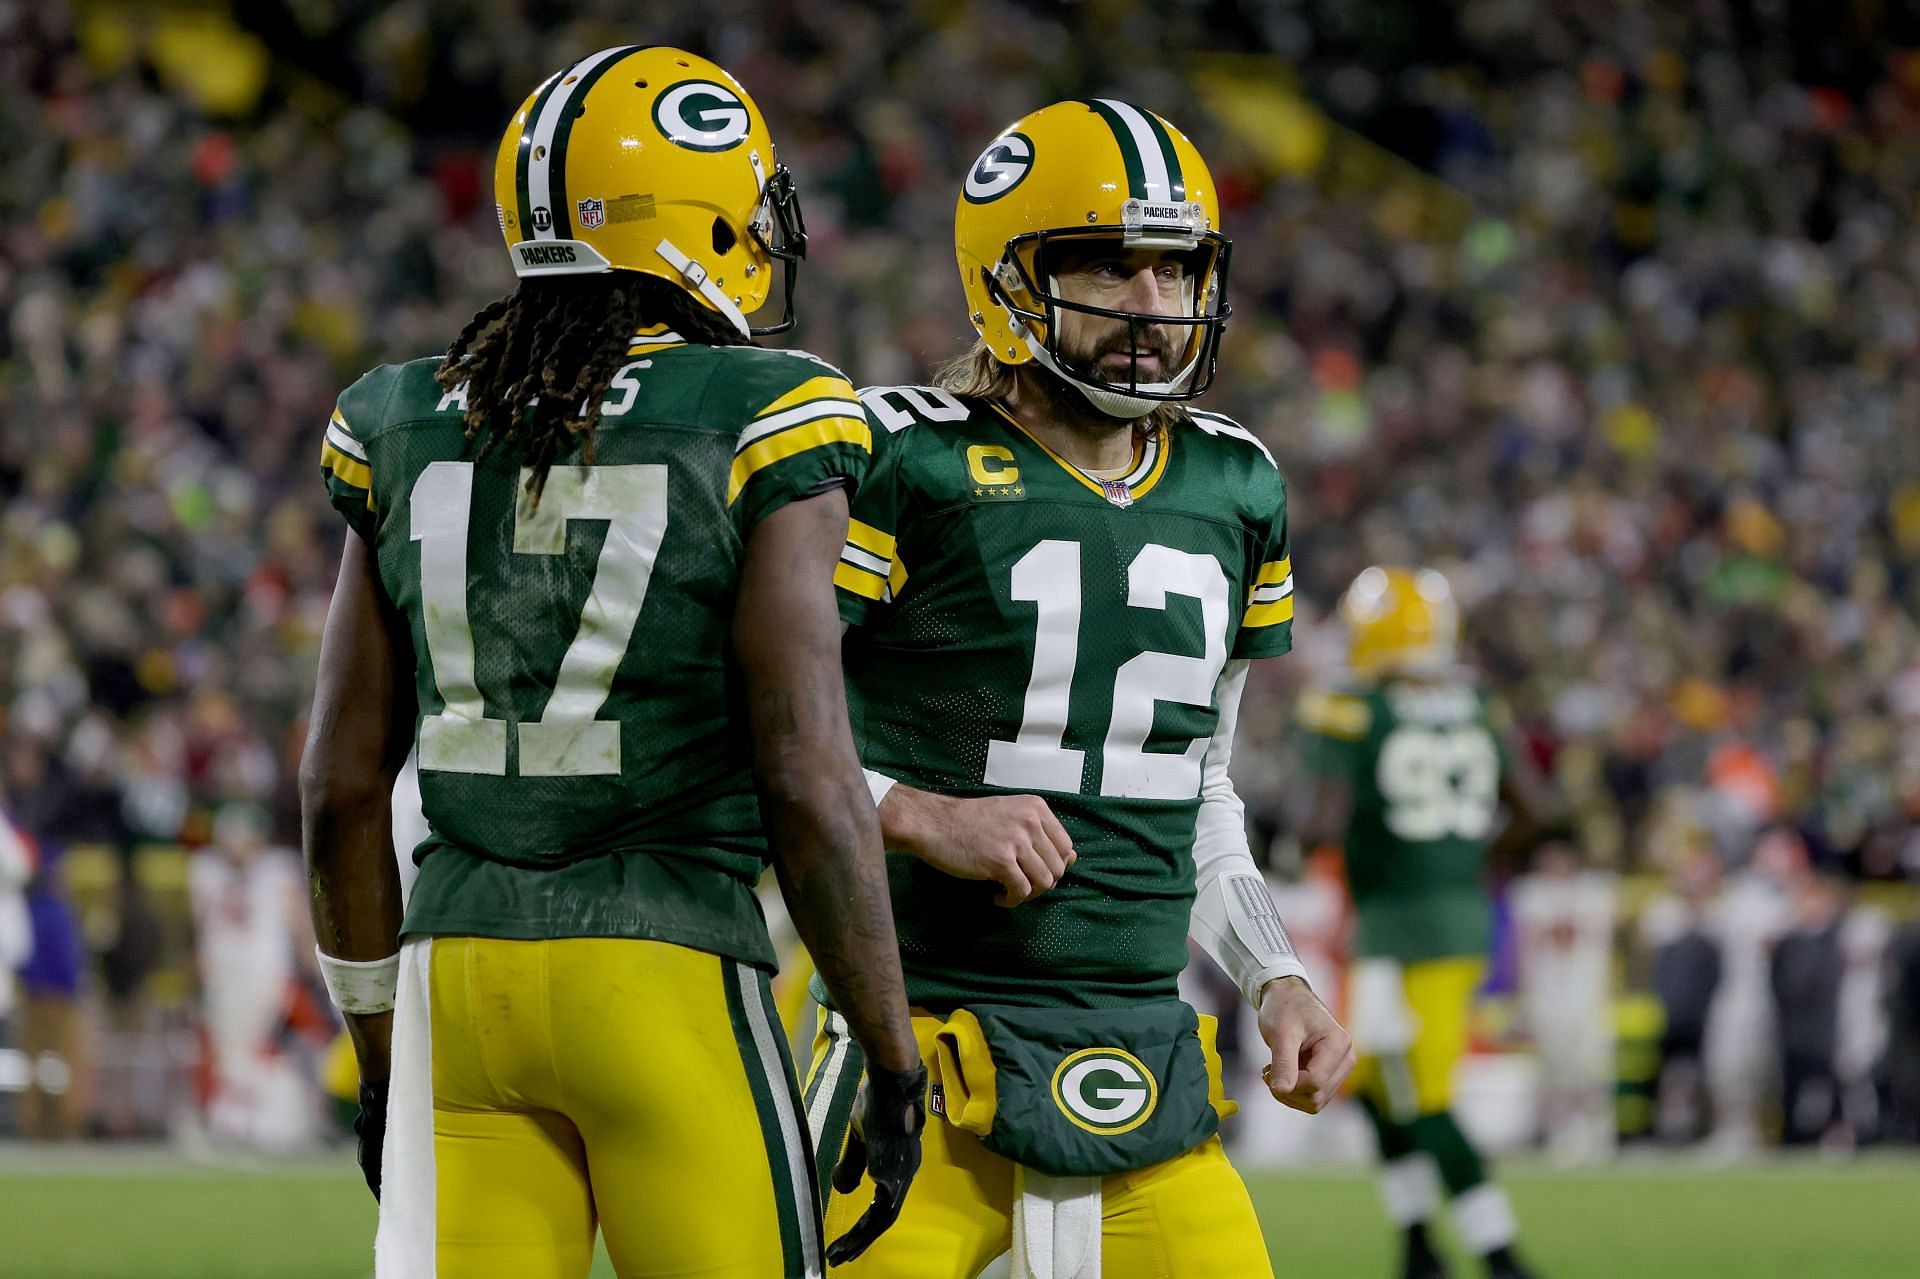 Rodgers and Adams are one of the best duos in the NFL